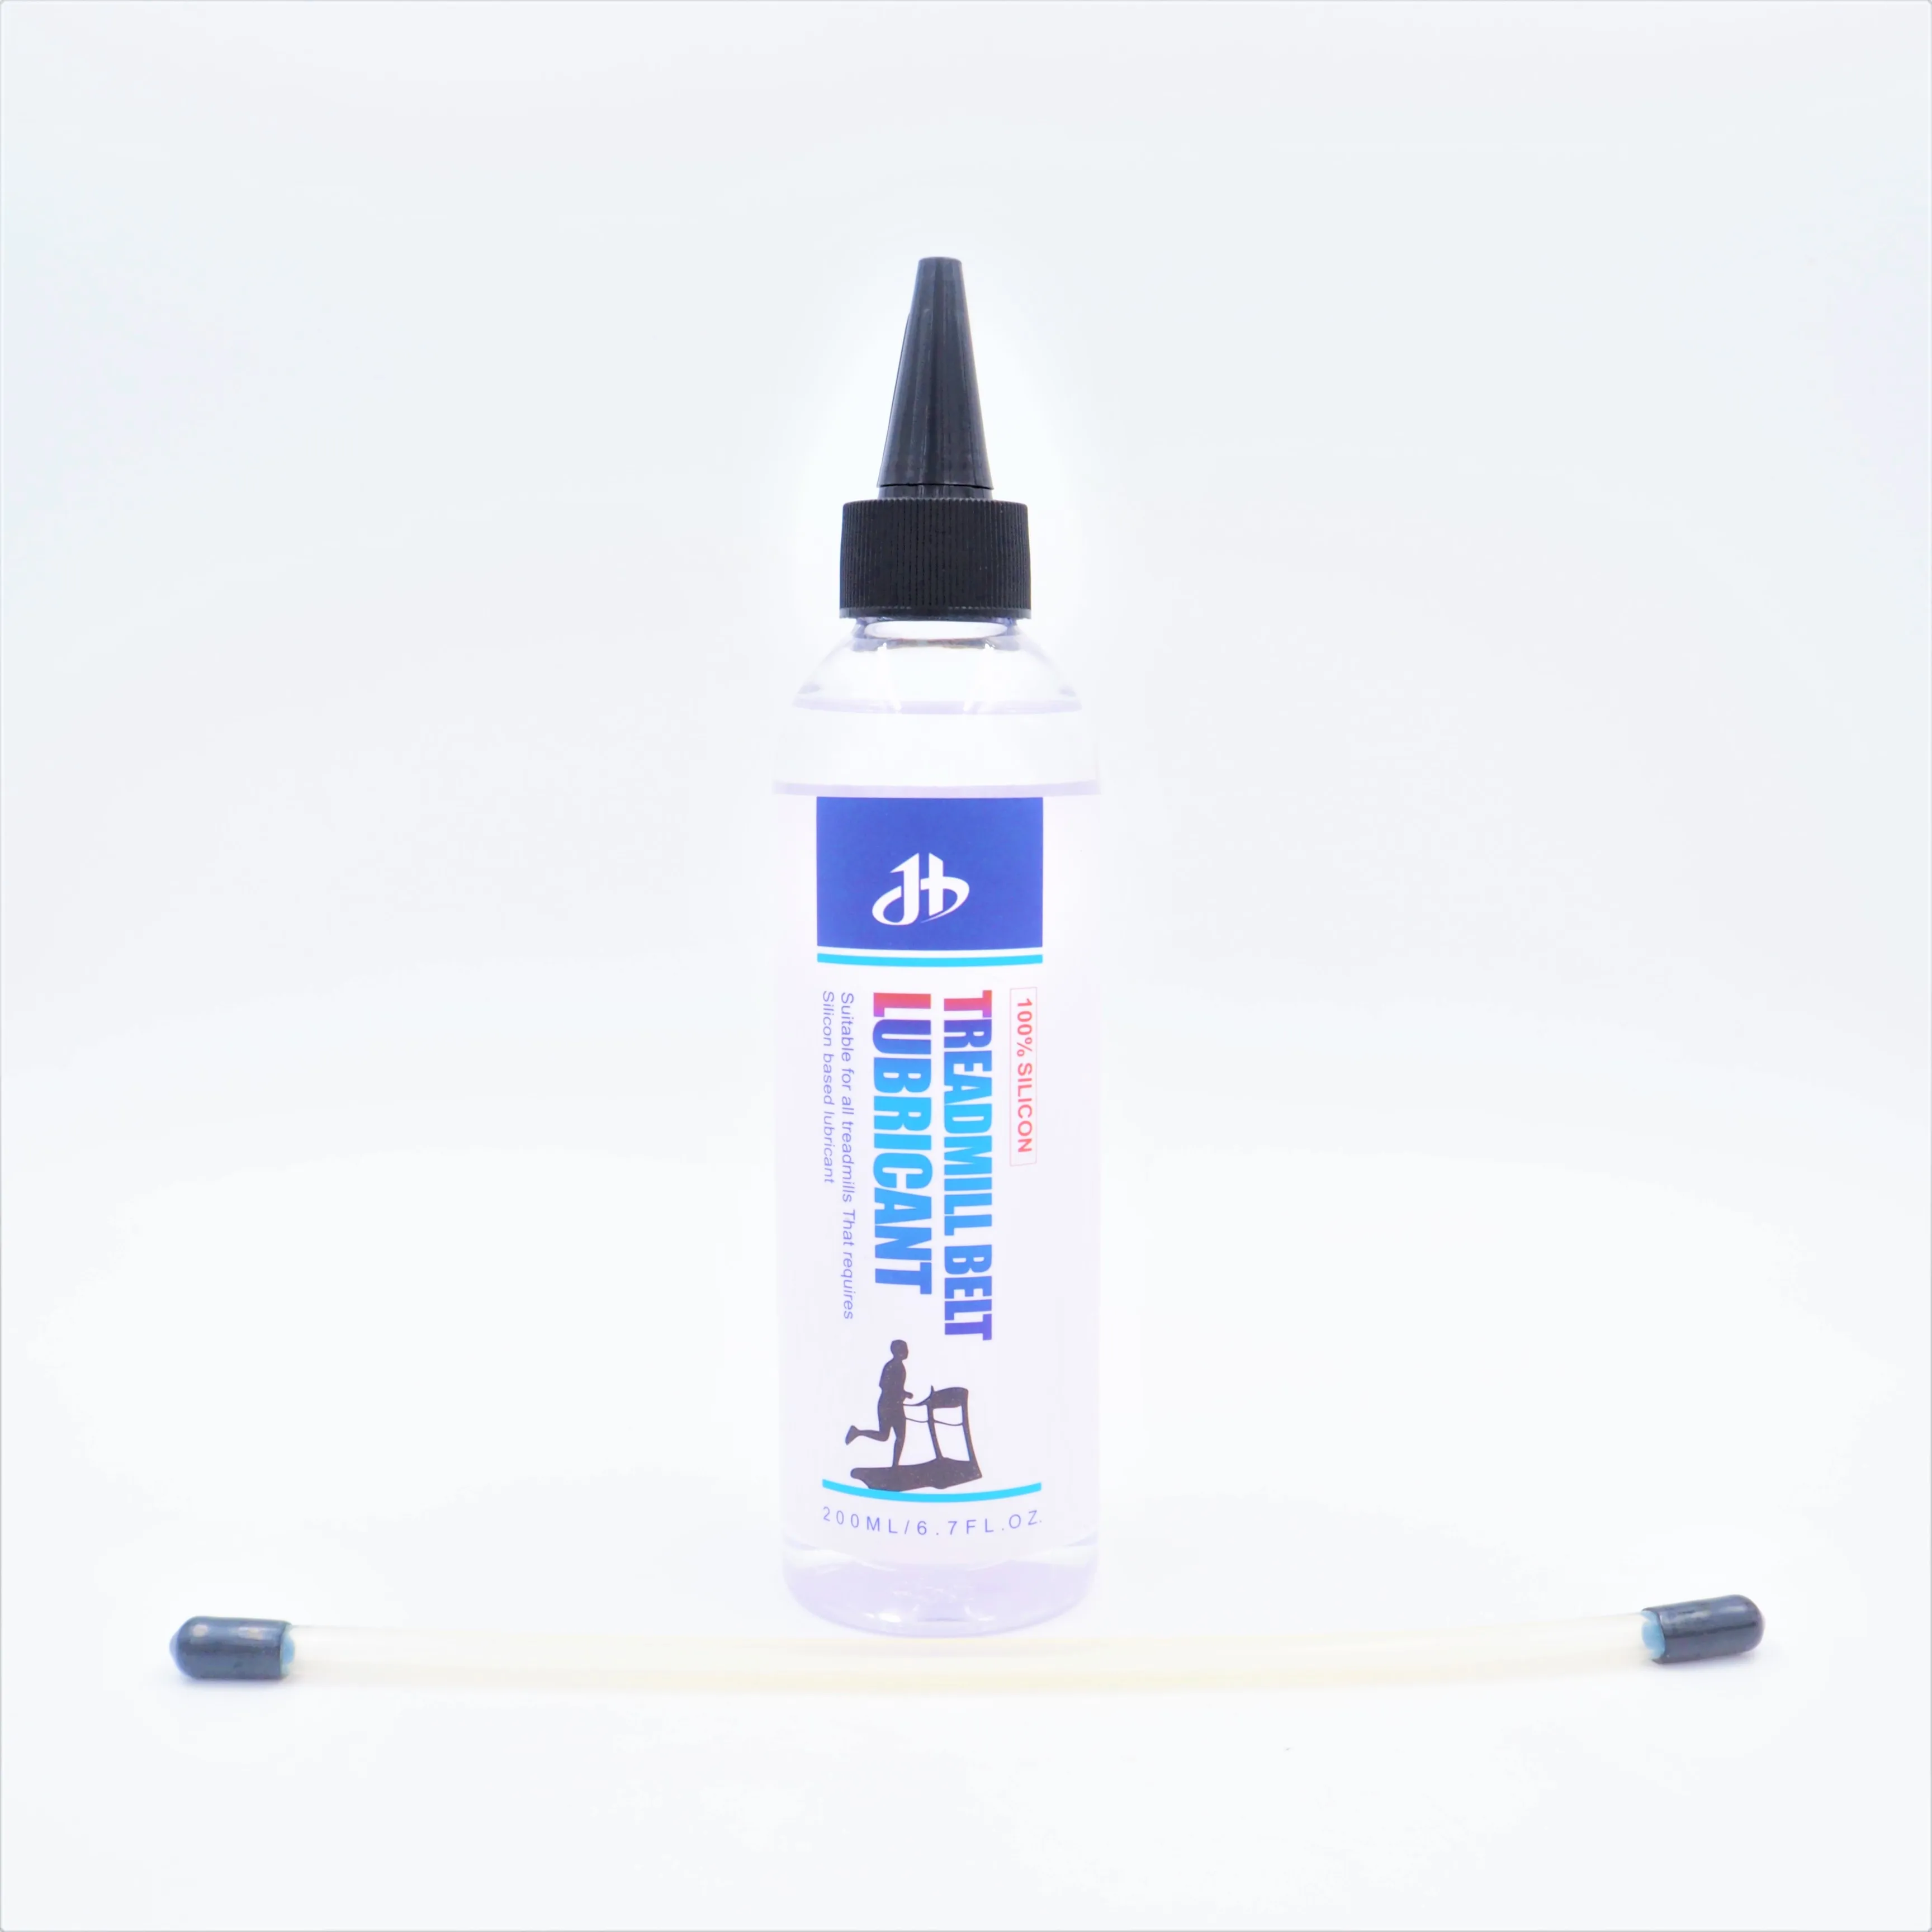 

100% Tested High Quality High Quality 150ml 1000cst Treadmill Belt Lubrication Treadmill Silicone Oil, Transparent, colorless